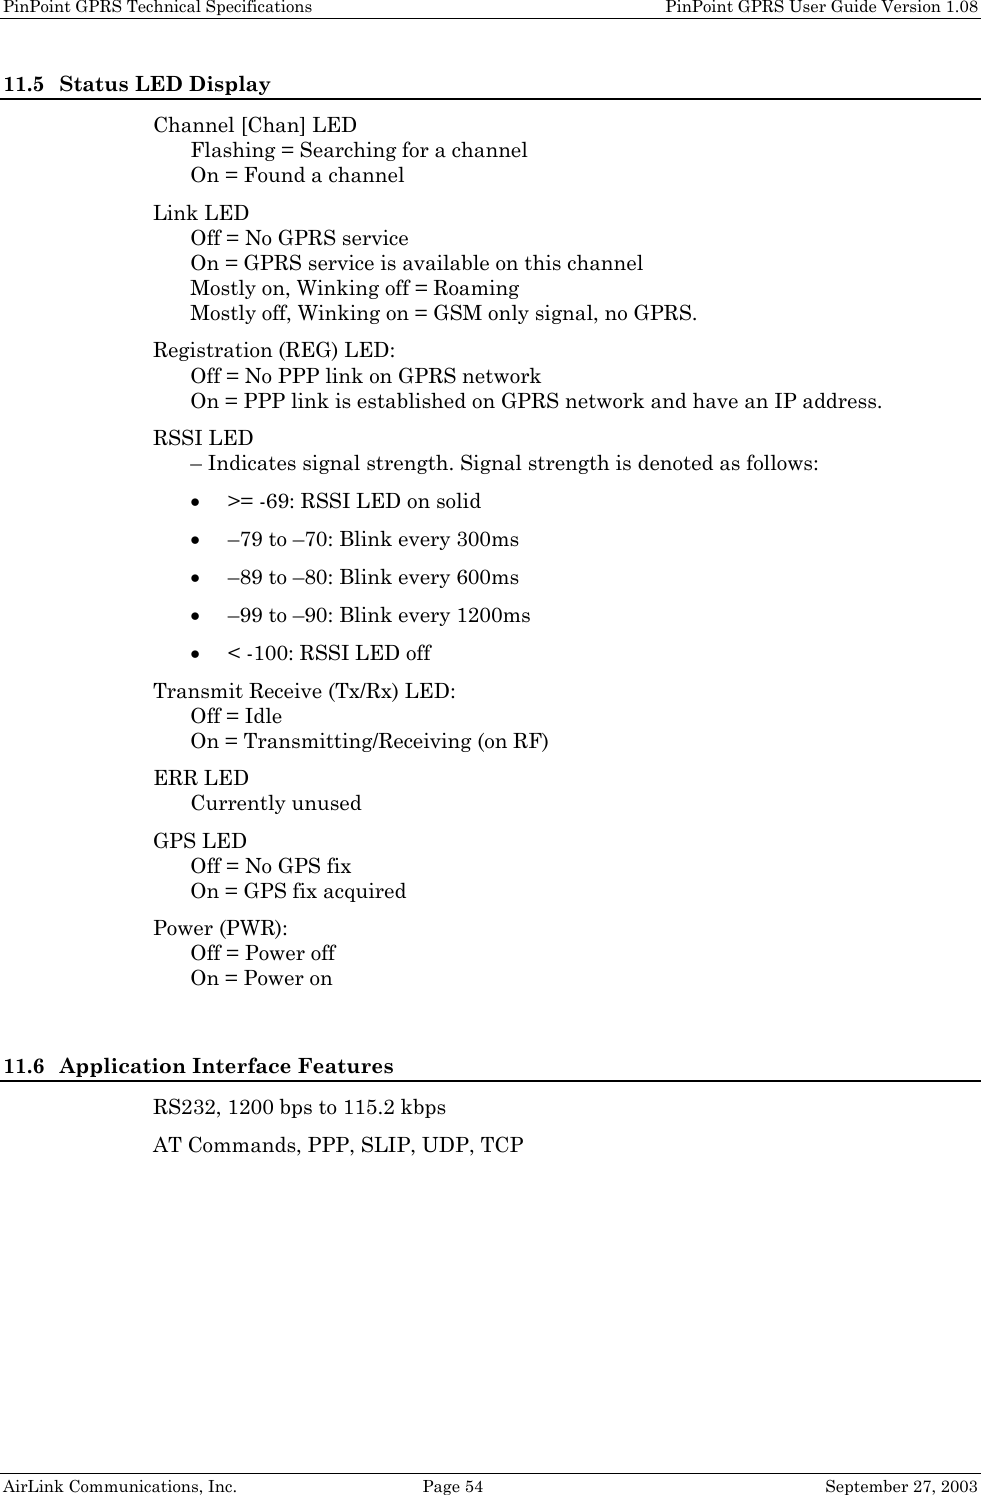 PinPoint GPRS Technical Specifications    PinPoint GPRS User Guide Version 1.08 AirLink Communications, Inc.  Page 54  September 27, 2003 11.5 Status LED Display Channel [Chan] LED Flashing = Searching for a channel On = Found a channel Link LED Off = No GPRS service On = GPRS service is available on this channel Mostly on, Winking off = Roaming Mostly off, Winking on = GSM only signal, no GPRS. Registration (REG) LED: Off = No PPP link on GPRS network On = PPP link is established on GPRS network and have an IP address. RSSI LED – Indicates signal strength. Signal strength is denoted as follows: • &gt;= -69: RSSI LED on solid • –79 to –70: Blink every 300ms • –89 to –80: Blink every 600ms • –99 to –90: Blink every 1200ms • &lt; -100: RSSI LED off Transmit Receive (Tx/Rx) LED: Off = Idle On = Transmitting/Receiving (on RF) ERR LED Currently unused GPS LED Off = No GPS fix On = GPS fix acquired Power (PWR): Off = Power off On = Power on  11.6 Application Interface Features RS232, 1200 bps to 115.2 kbps AT Commands, PPP, SLIP, UDP, TCP  